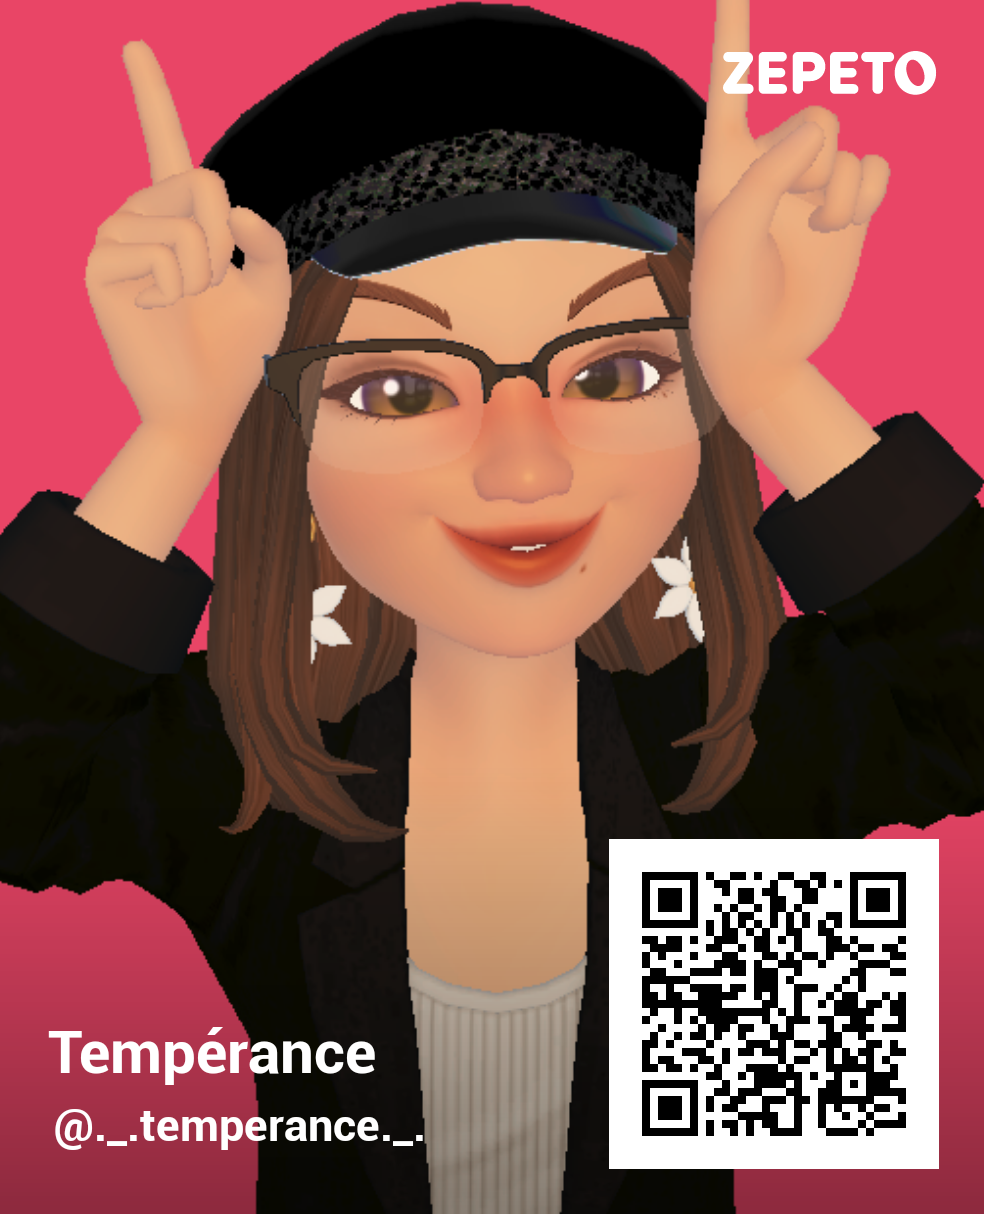 Come to Get in Touch on Zepeto with Tempérance Klug - From Arts 4 Sale.